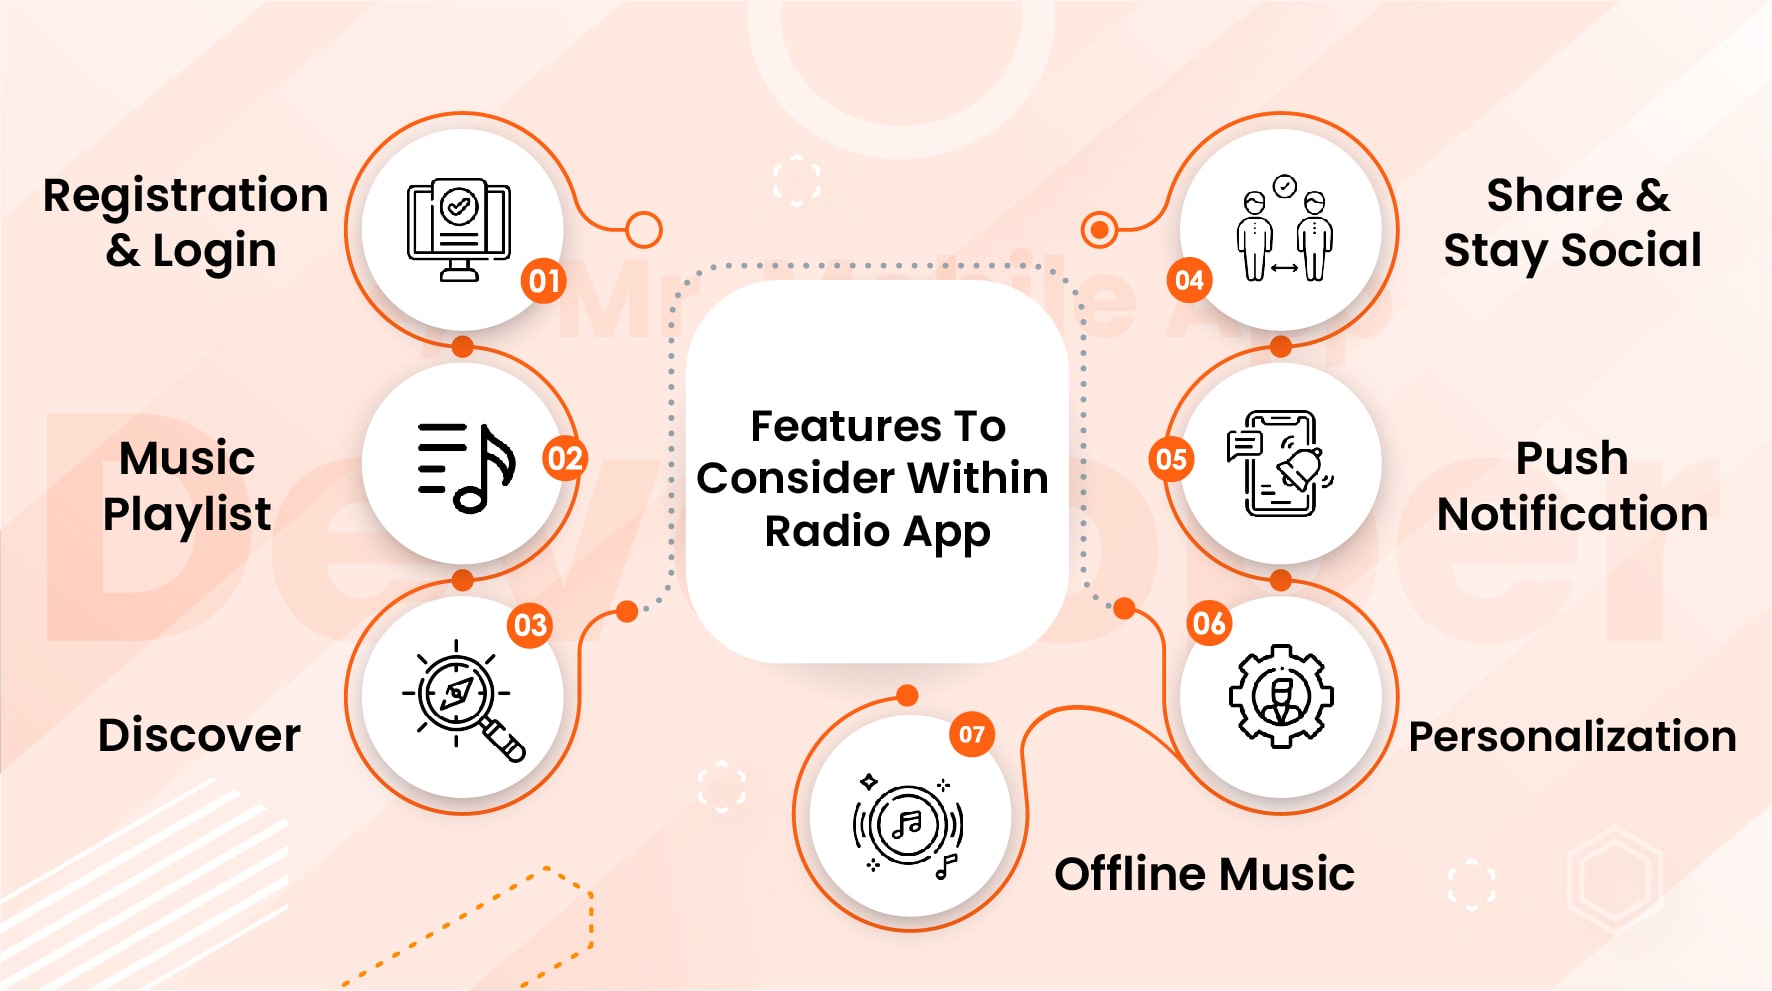 Features To Consider Within Radio App